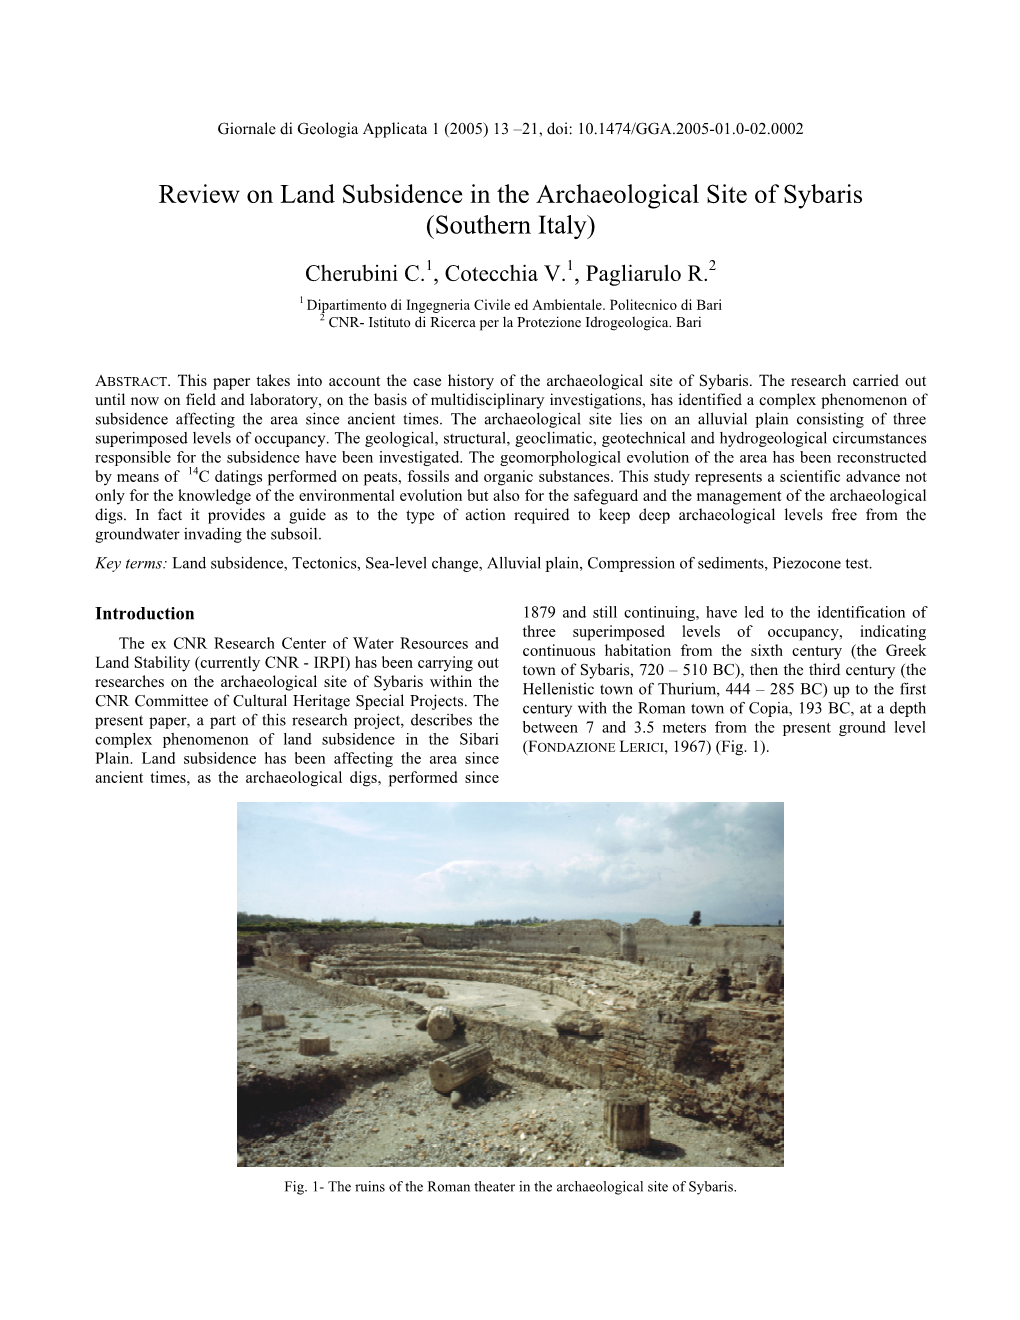 Review on Land Subsidence in the Archaeological Site of Sybaris (Southern Italy)